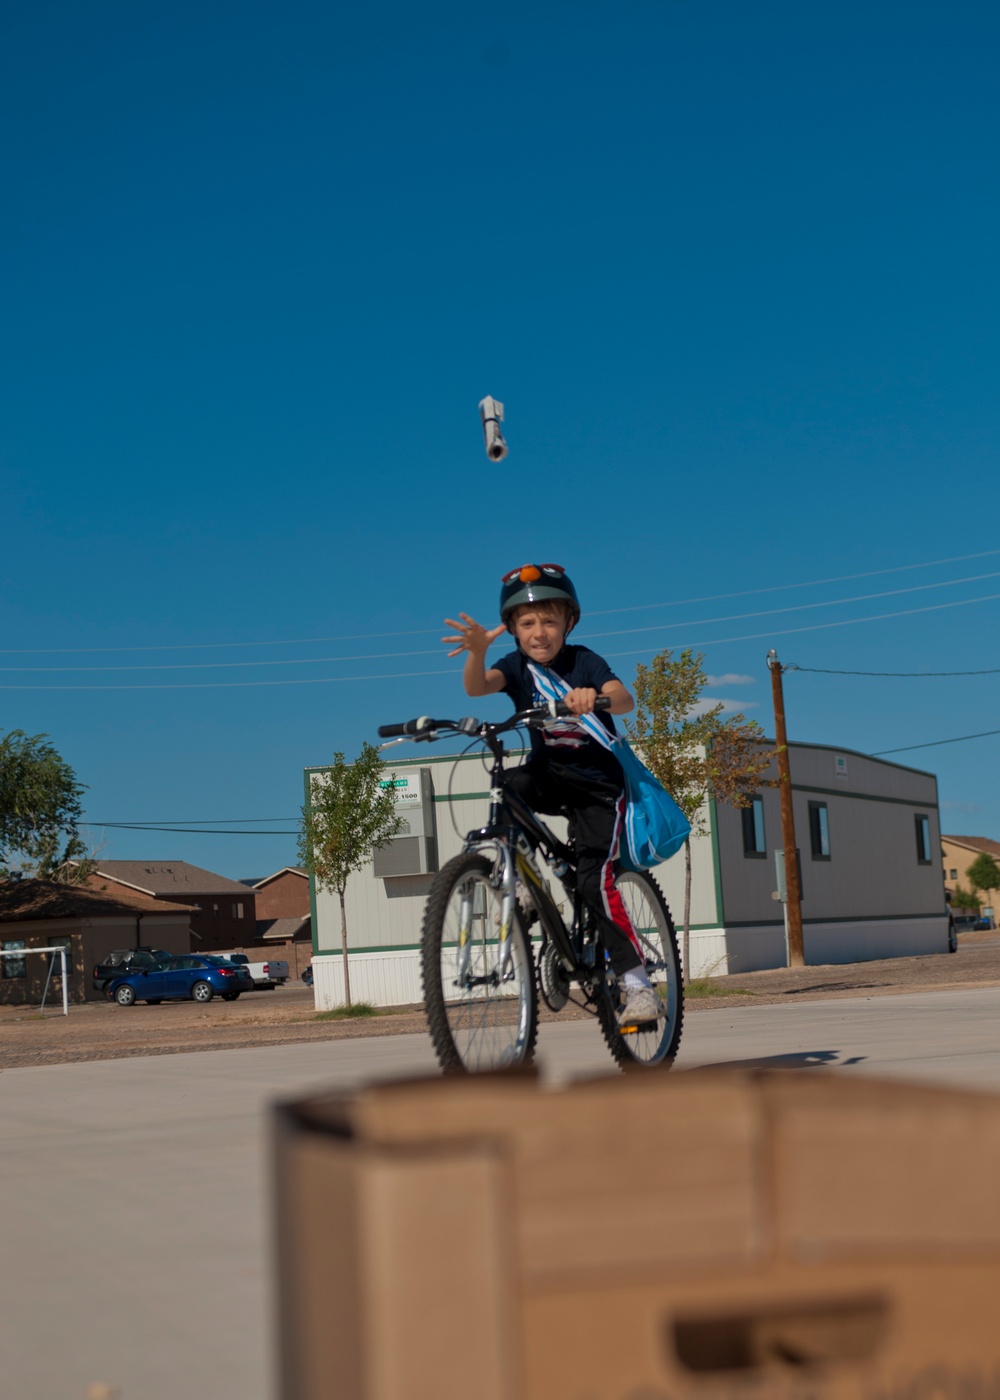 Children test their riding skills at Bicycle Rodeo